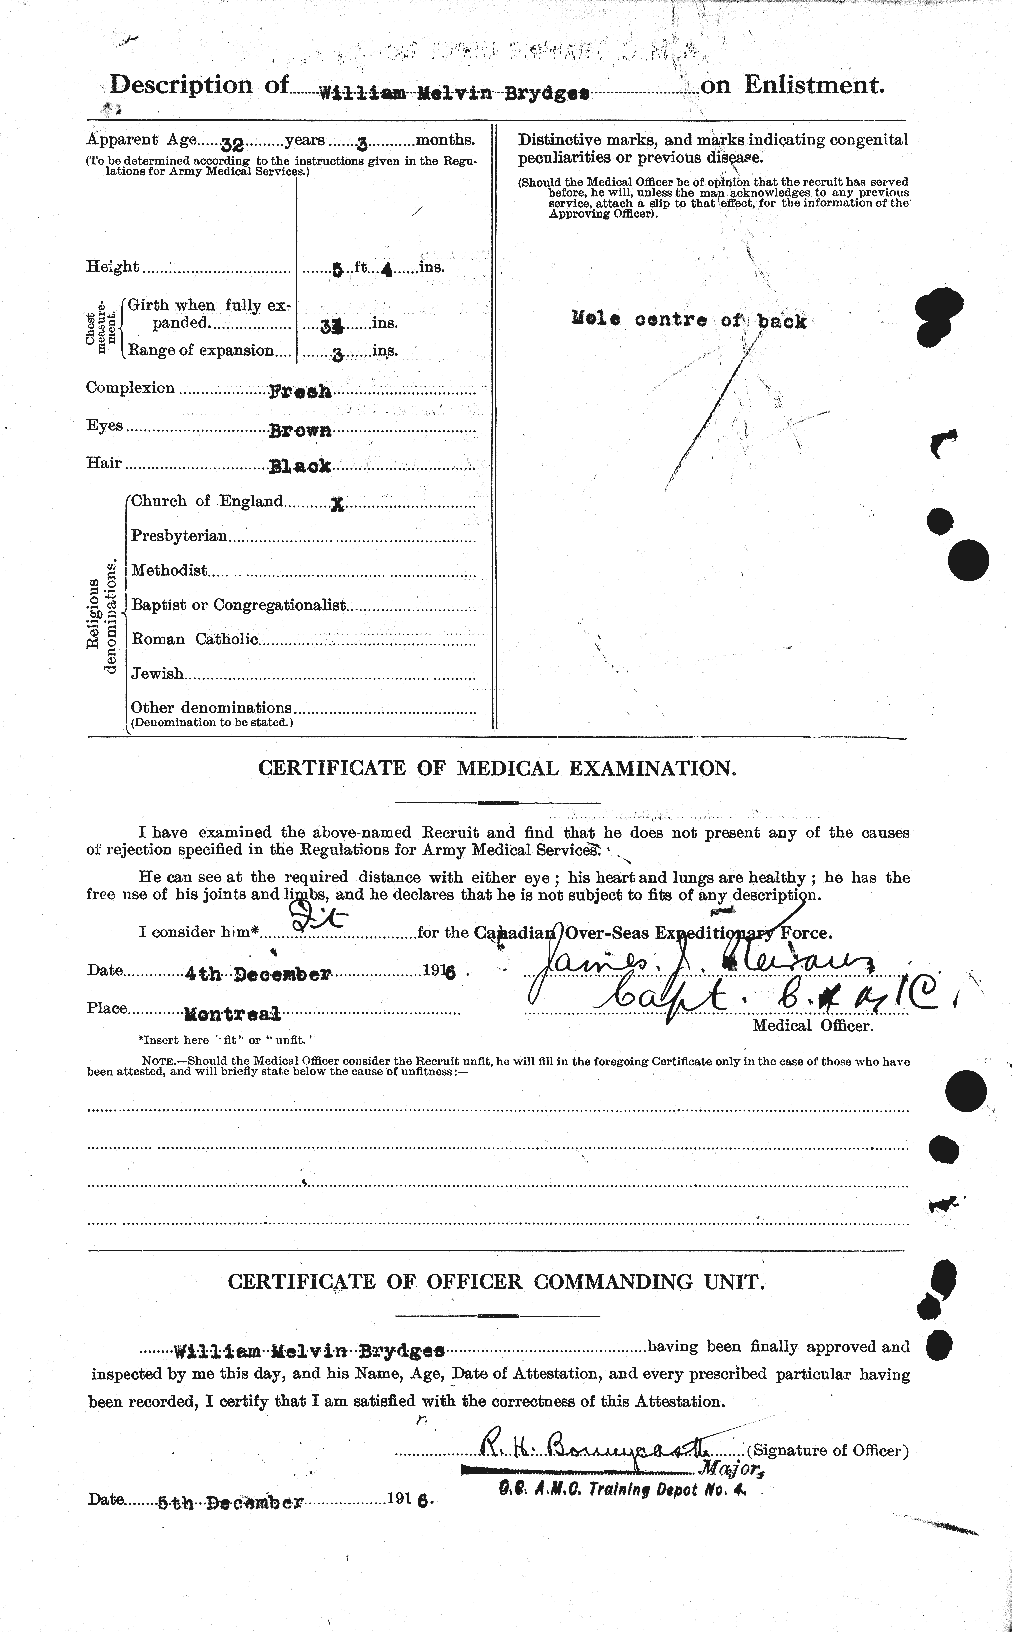 Personnel Records of the First World War - CEF 268822b